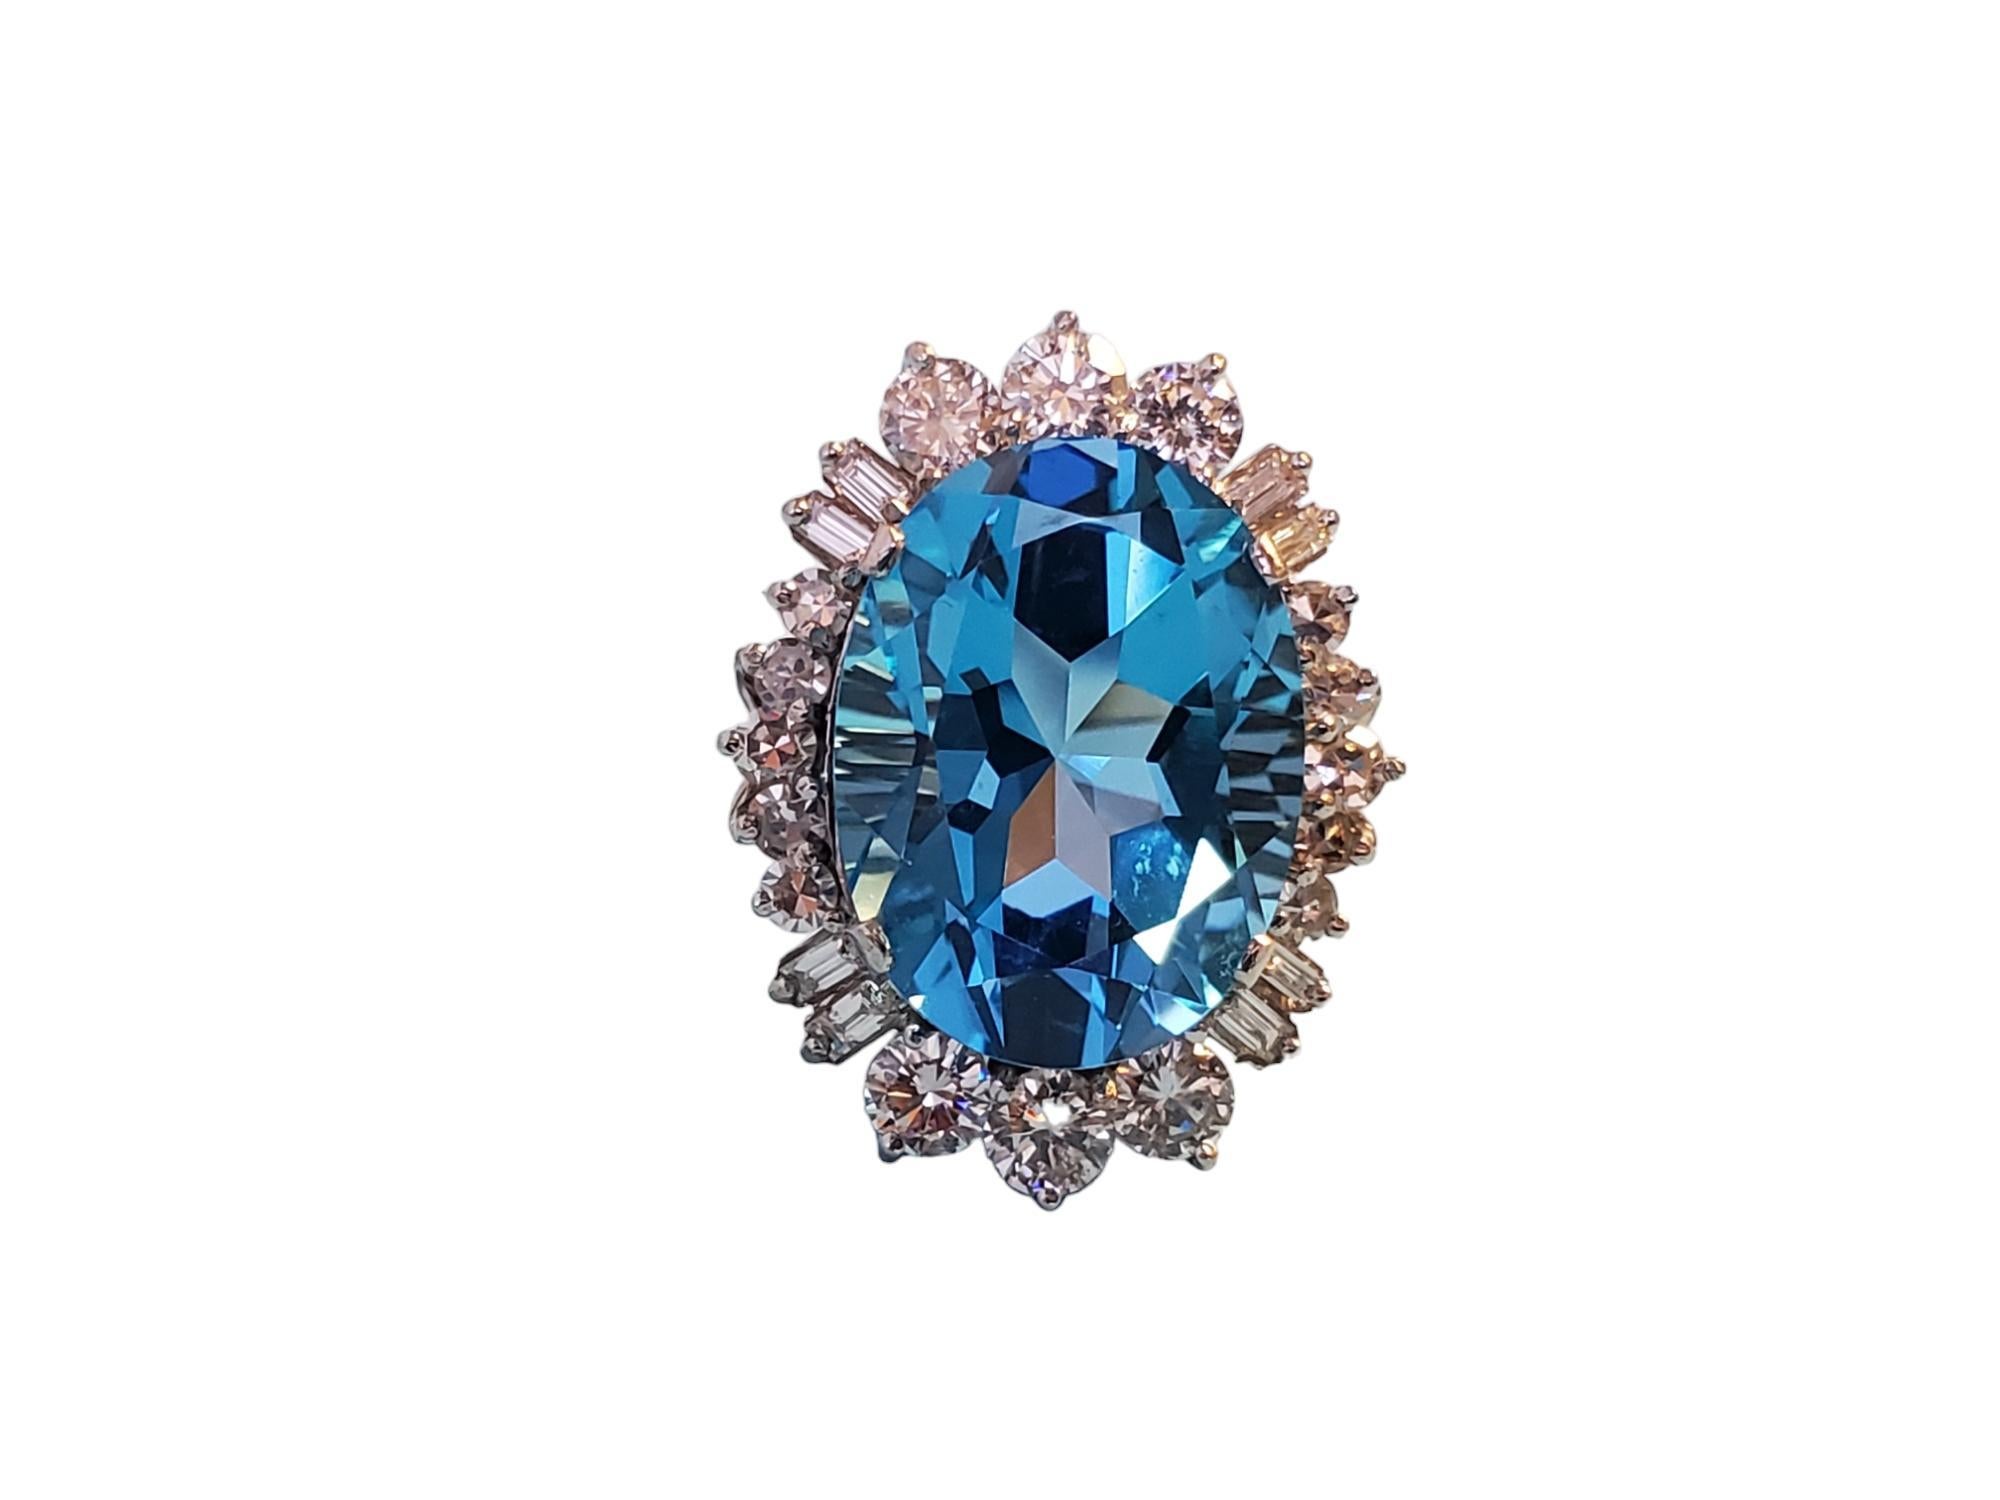 Stunning Cocktail Ring Oval 20x15mm Topaz 3tcw Diamonds

Listed is a spectacular cocktail ring with a very large blue Topaz with big beautiful diamonds ranging from F-H in color clean to the eye. The estimated weight of the Topaz is approximately